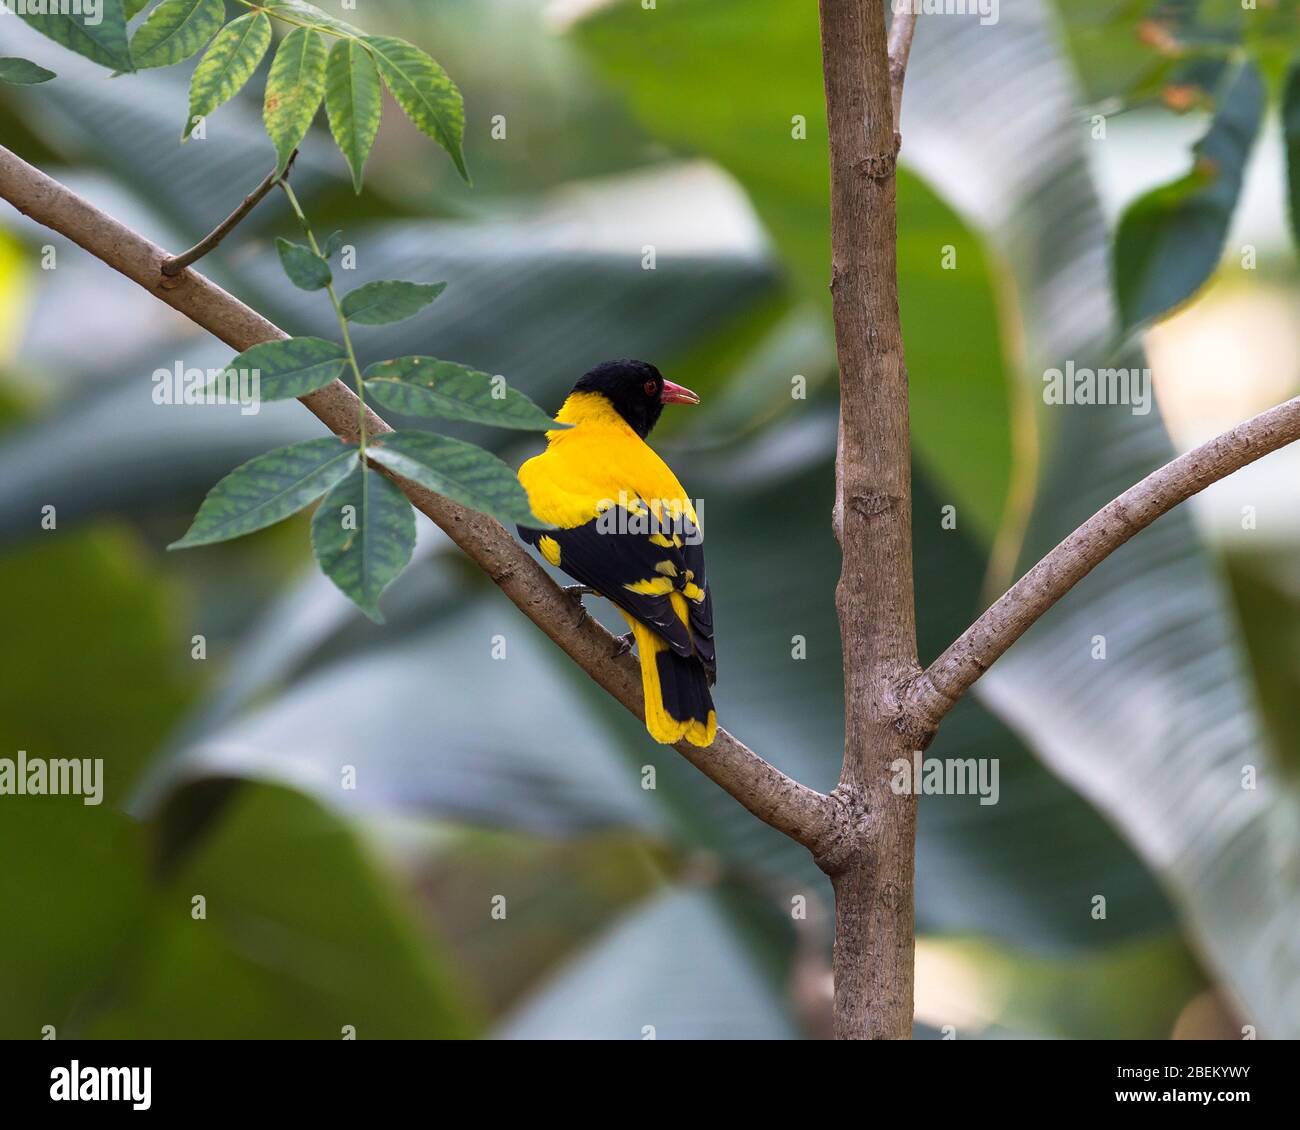 The Indian golden oriole (Oriolus kundoo) is a species of oriole found in the Indian subcontinent and Central Asia. Stock Photo